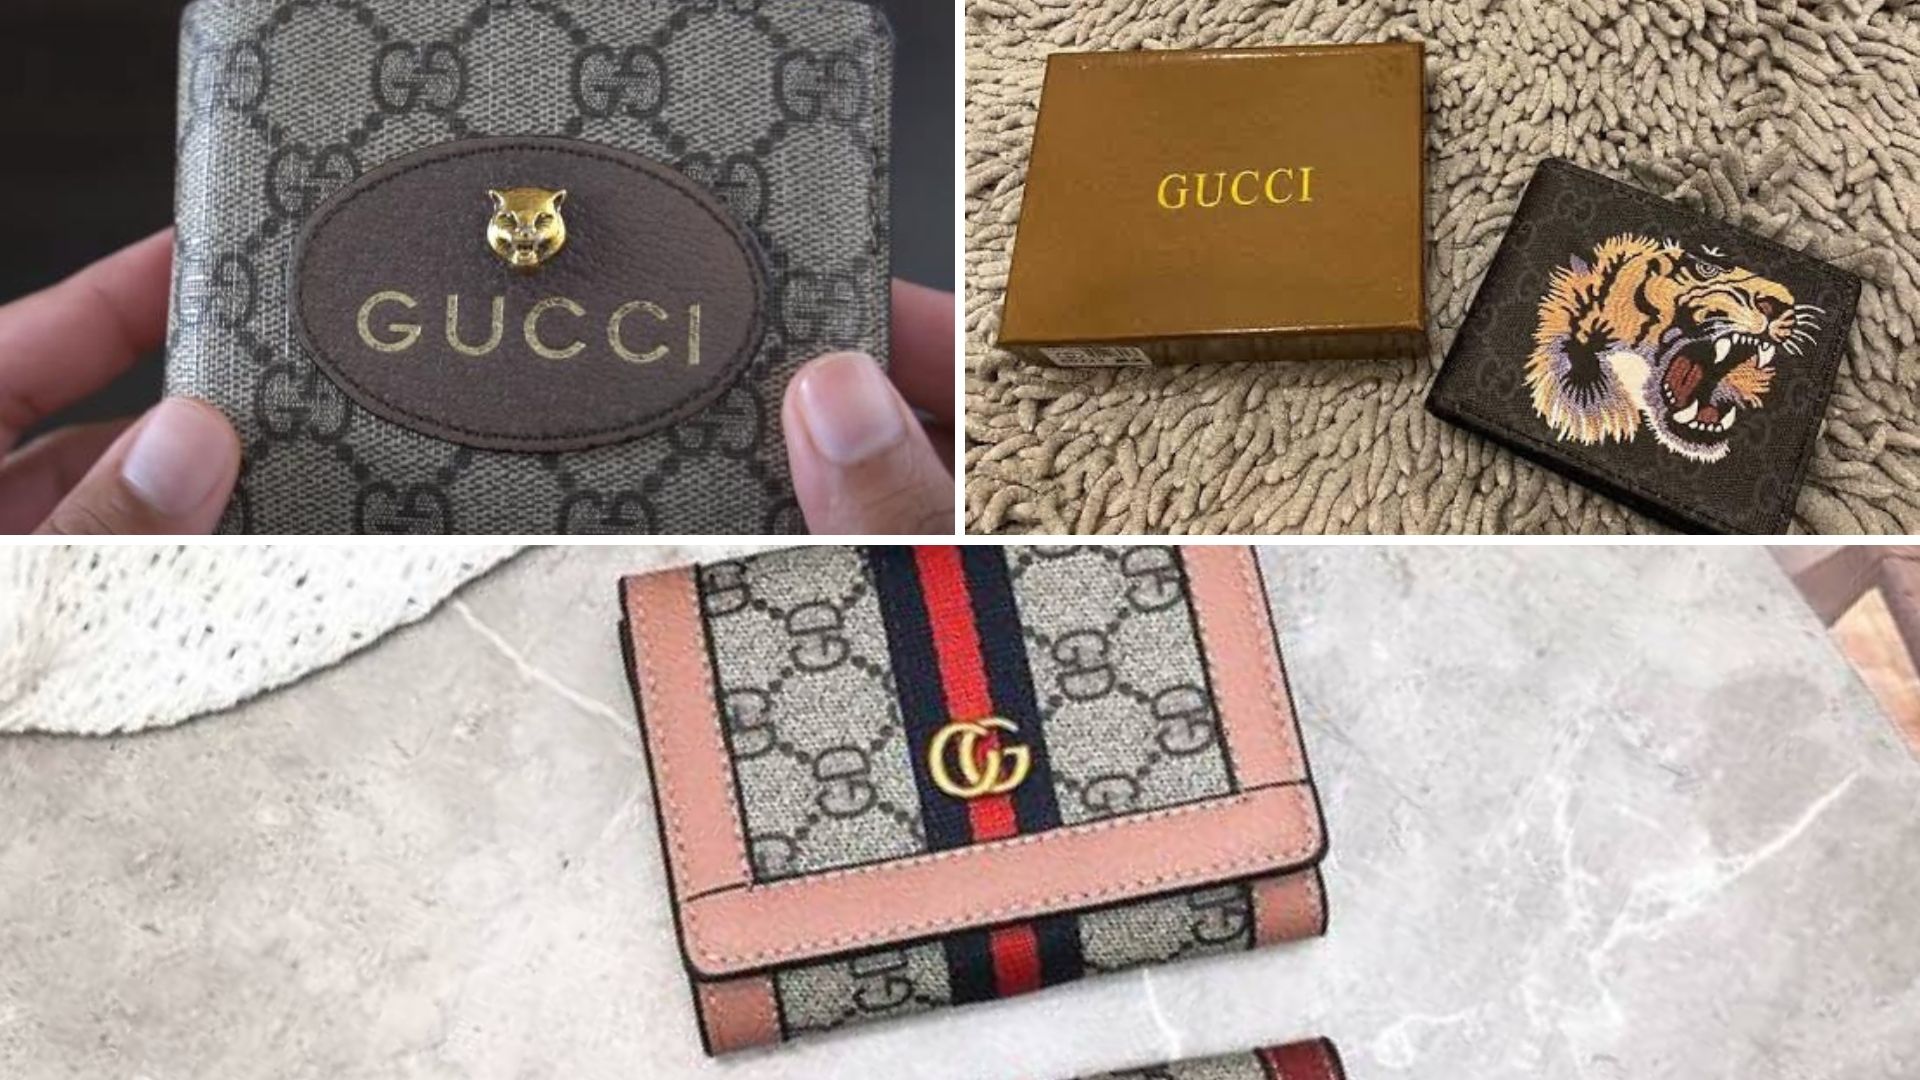 Showing off Gucci wallets.